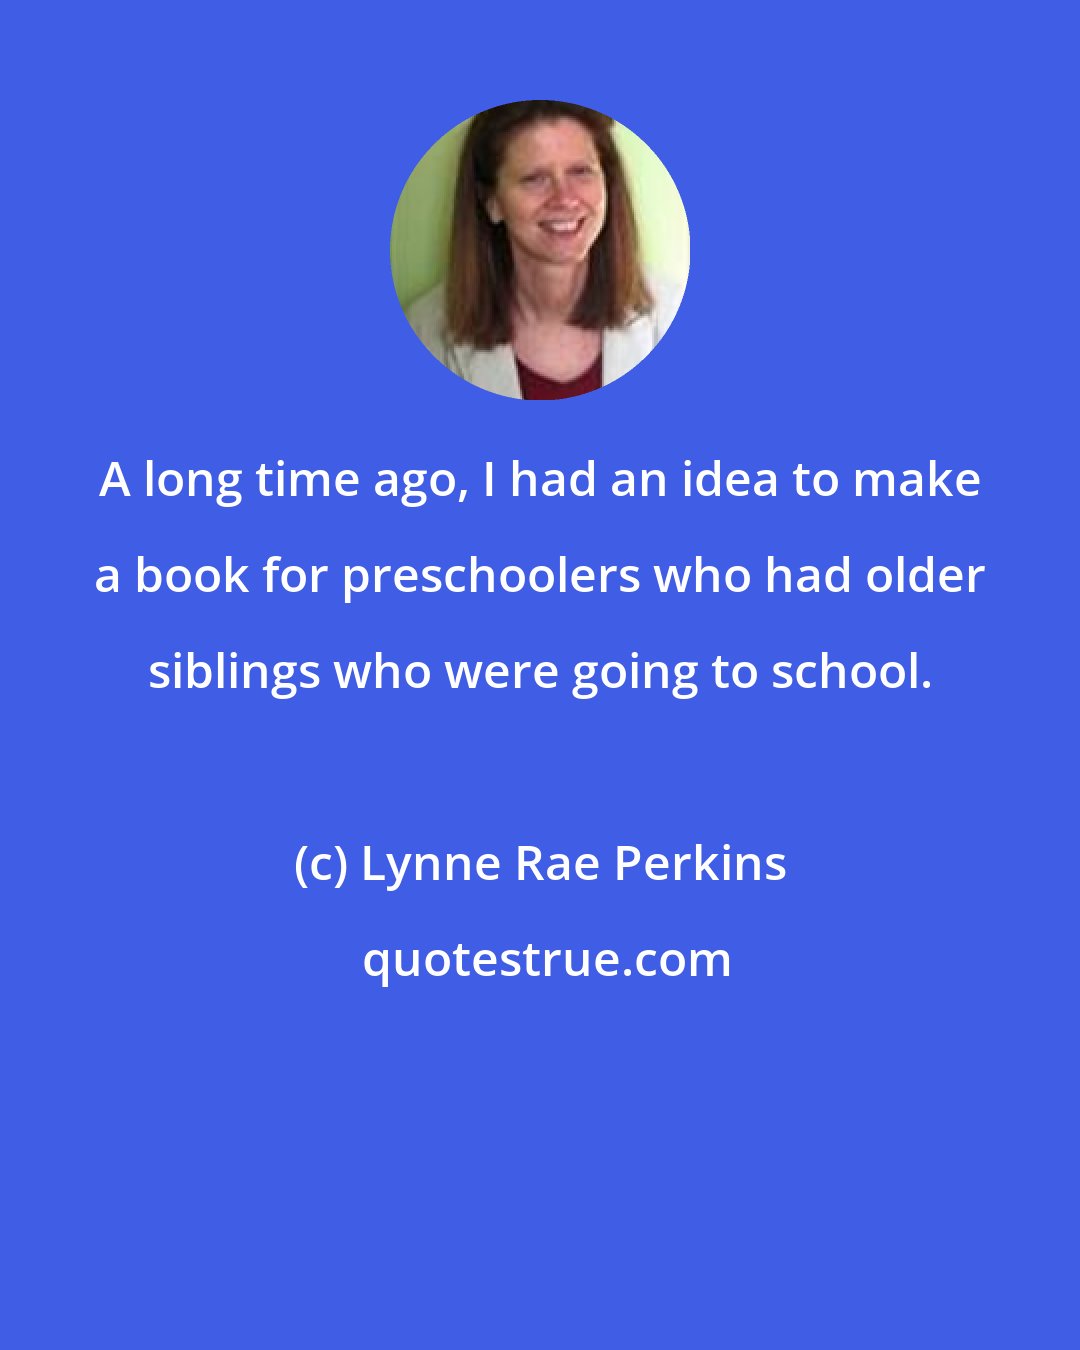 Lynne Rae Perkins: A long time ago, I had an idea to make a book for preschoolers who had older siblings who were going to school.